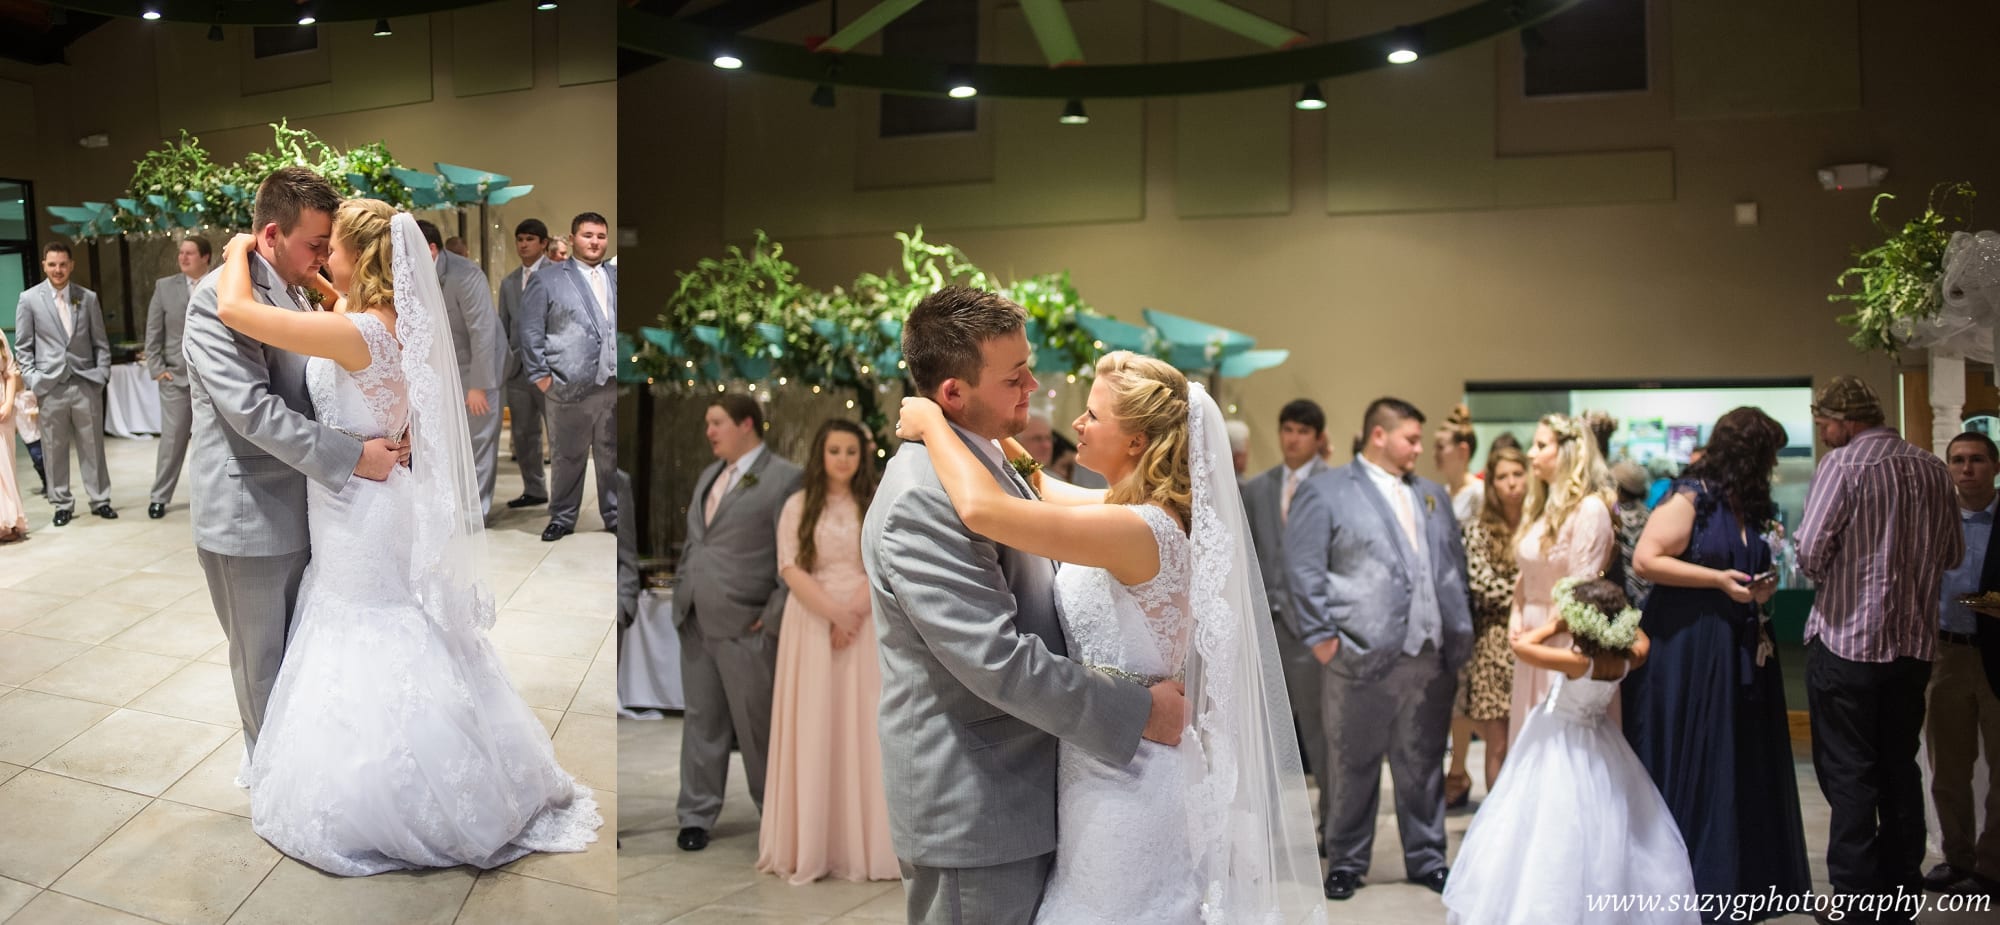 vows by victoria-lake charles-wedding-photography-suzy g-photography-suzygphotography_0081